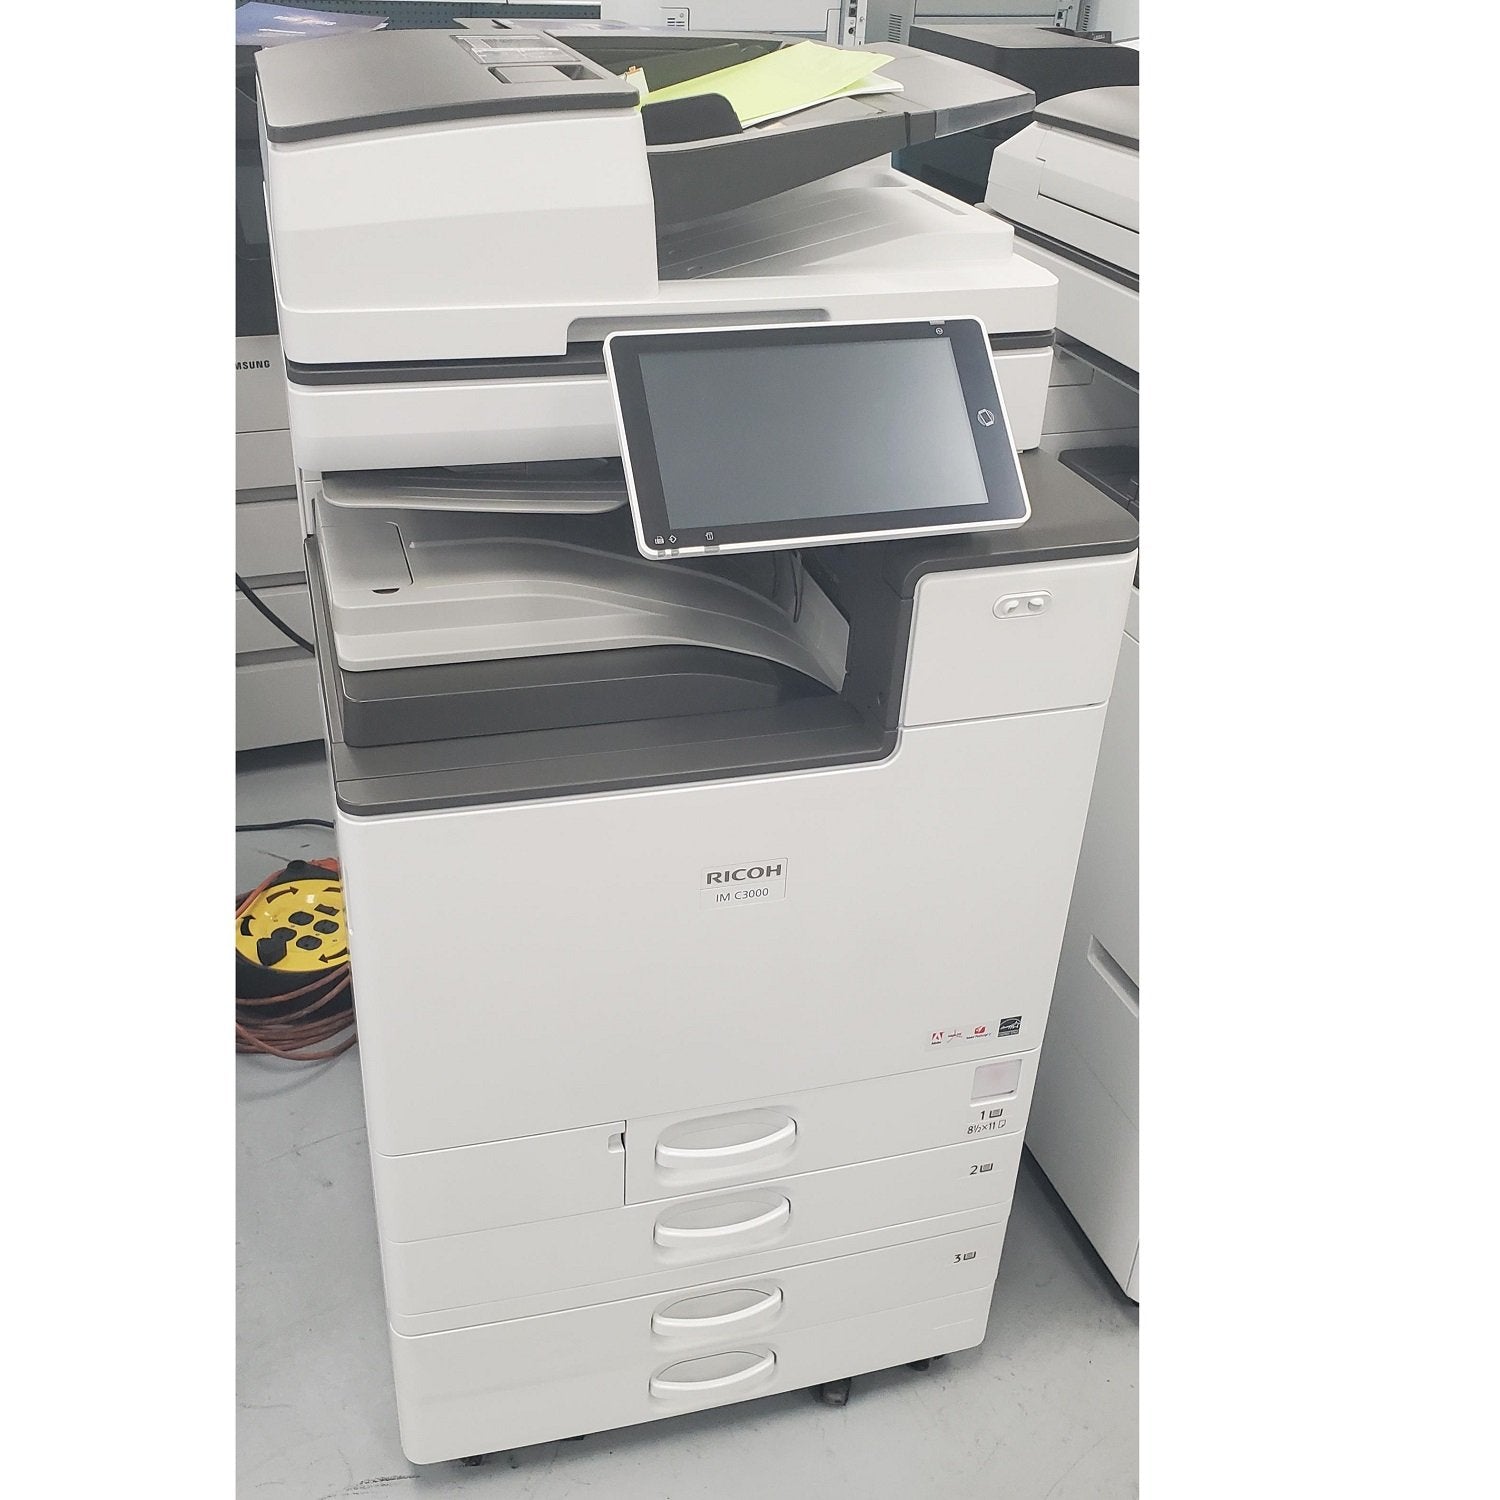 Absolute Toner $95/Month Ricoh IM C3000 (LOW METER) Color Laser Multifunction Printer Copier Scanner With 4 Paper Cassettes For Office Showroom Color Copiers